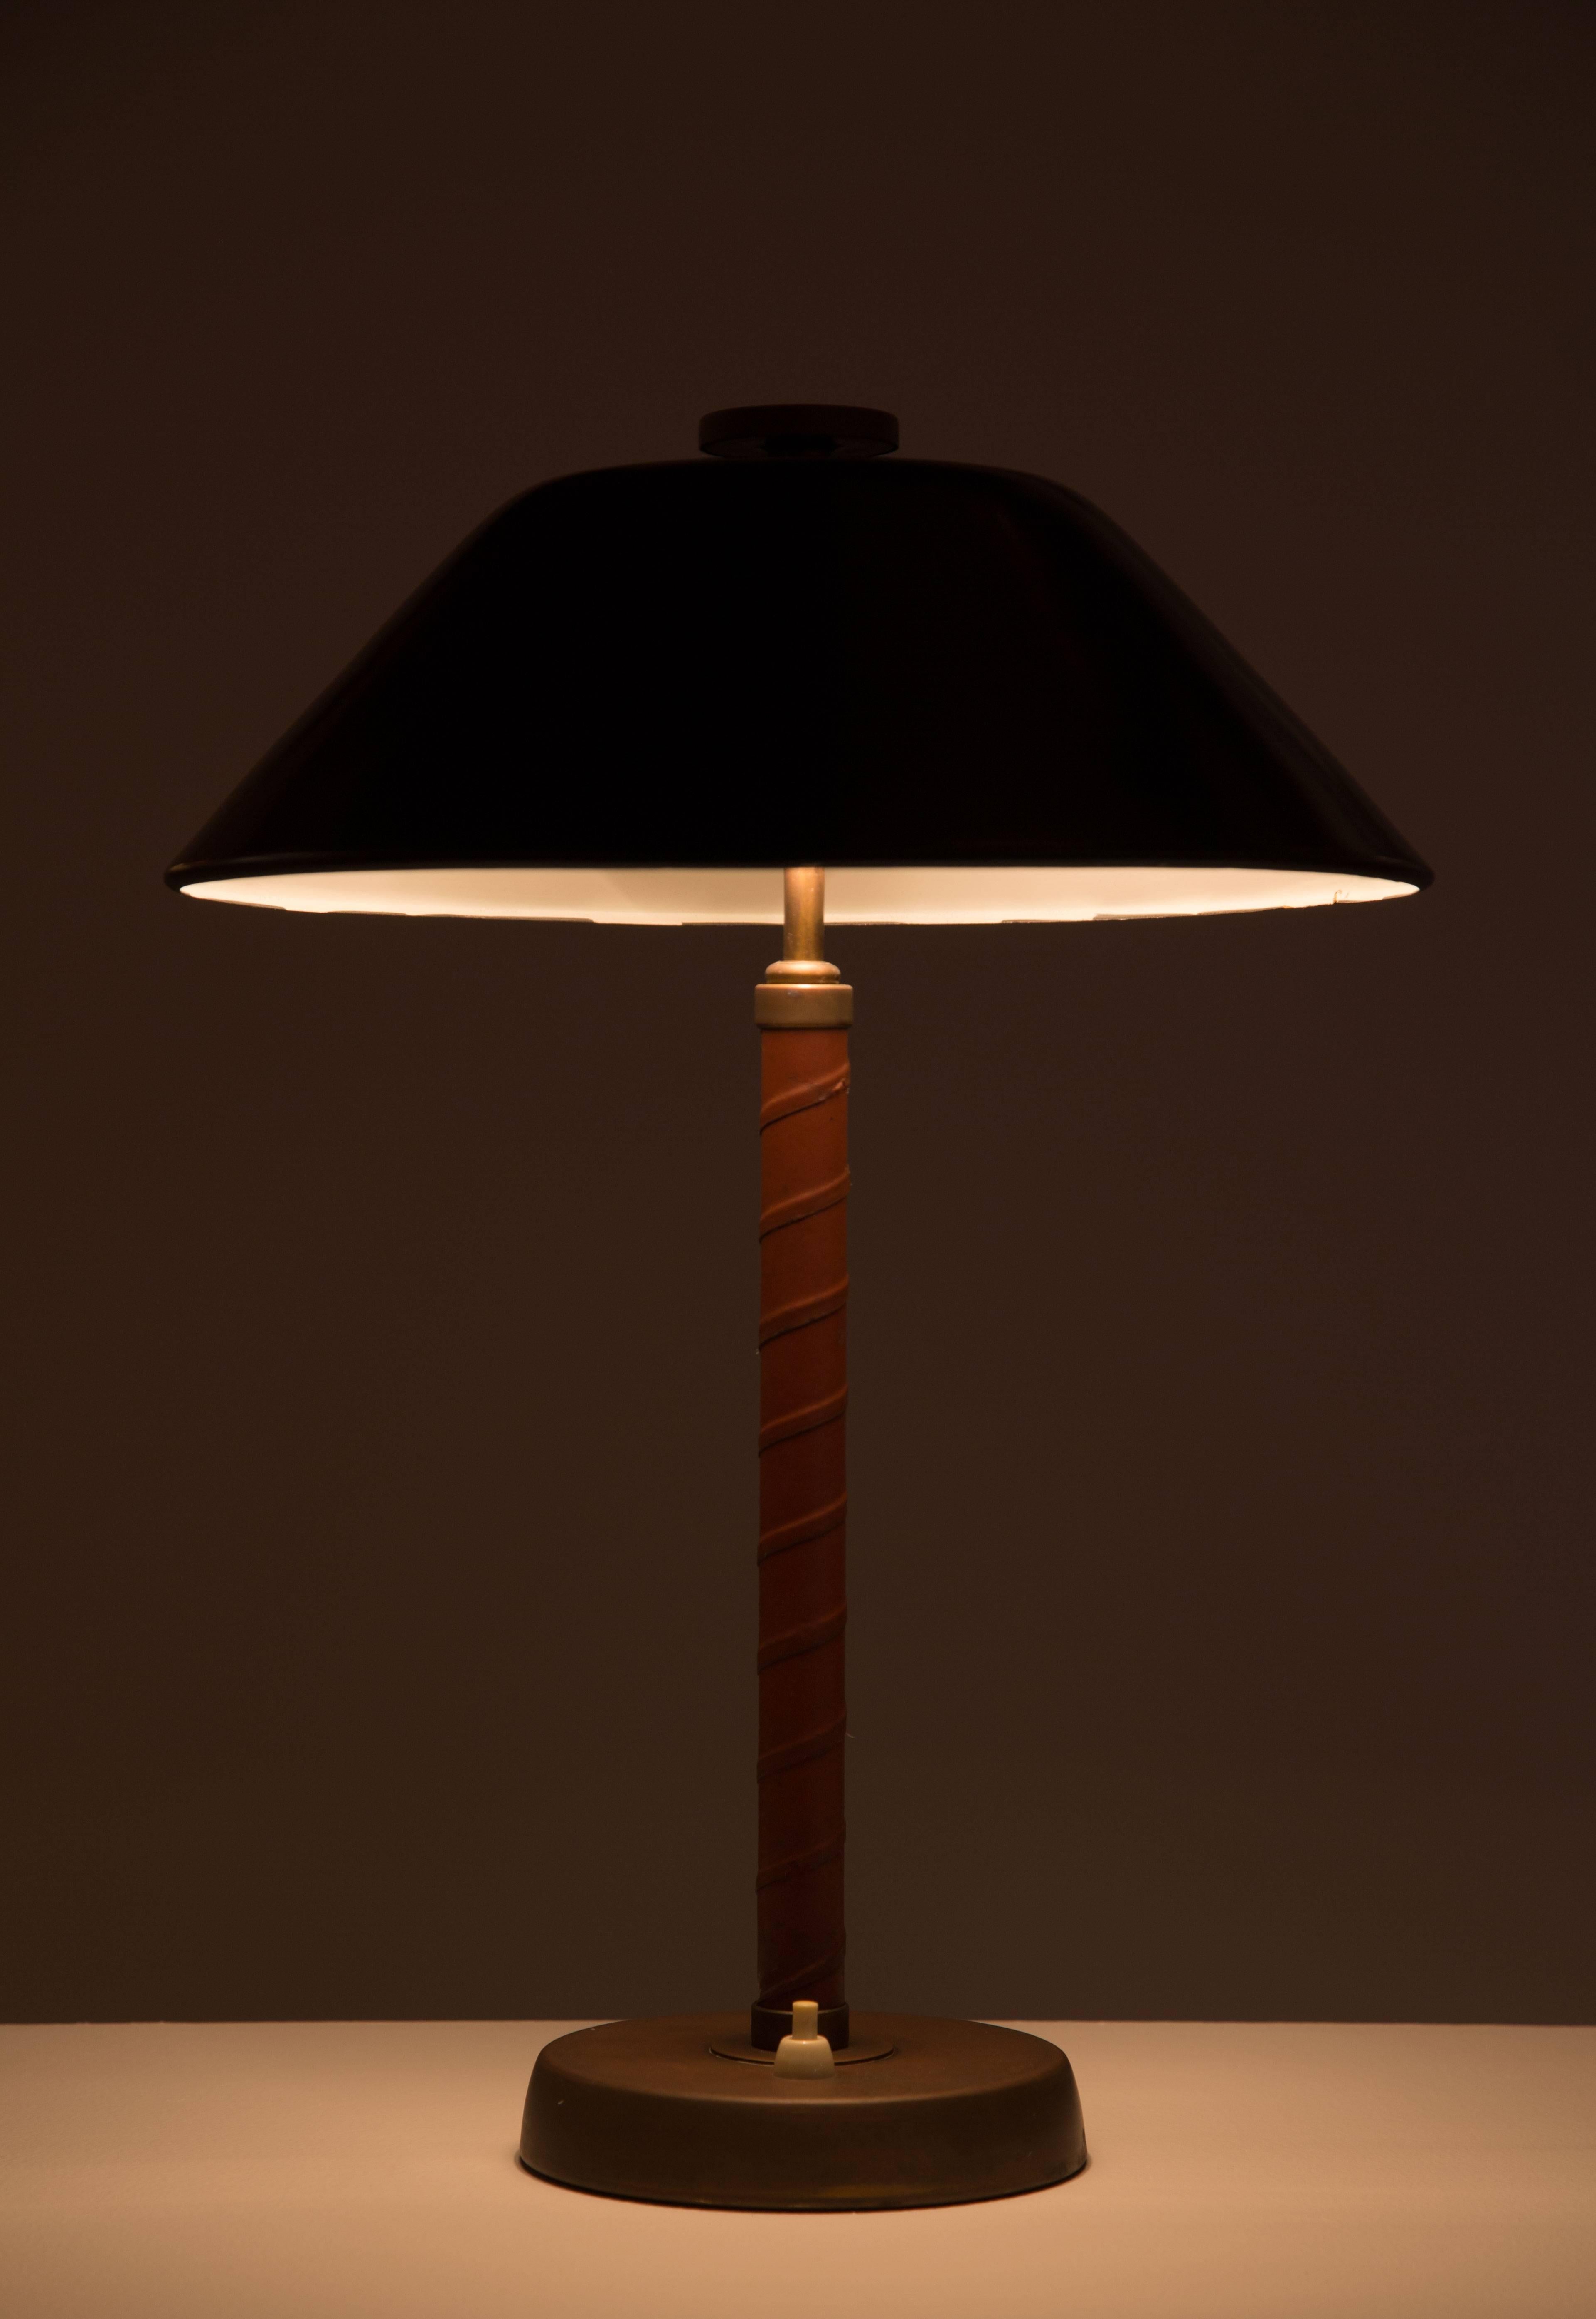 Swedish table lamp made of brass with a leather wrapped stem, designed and made by Einar Bäckström in Malmö, Sweden in the 1940s. Original cord. E27 60 W maximum bulb. Original made in Sweden stamp on the bottom.